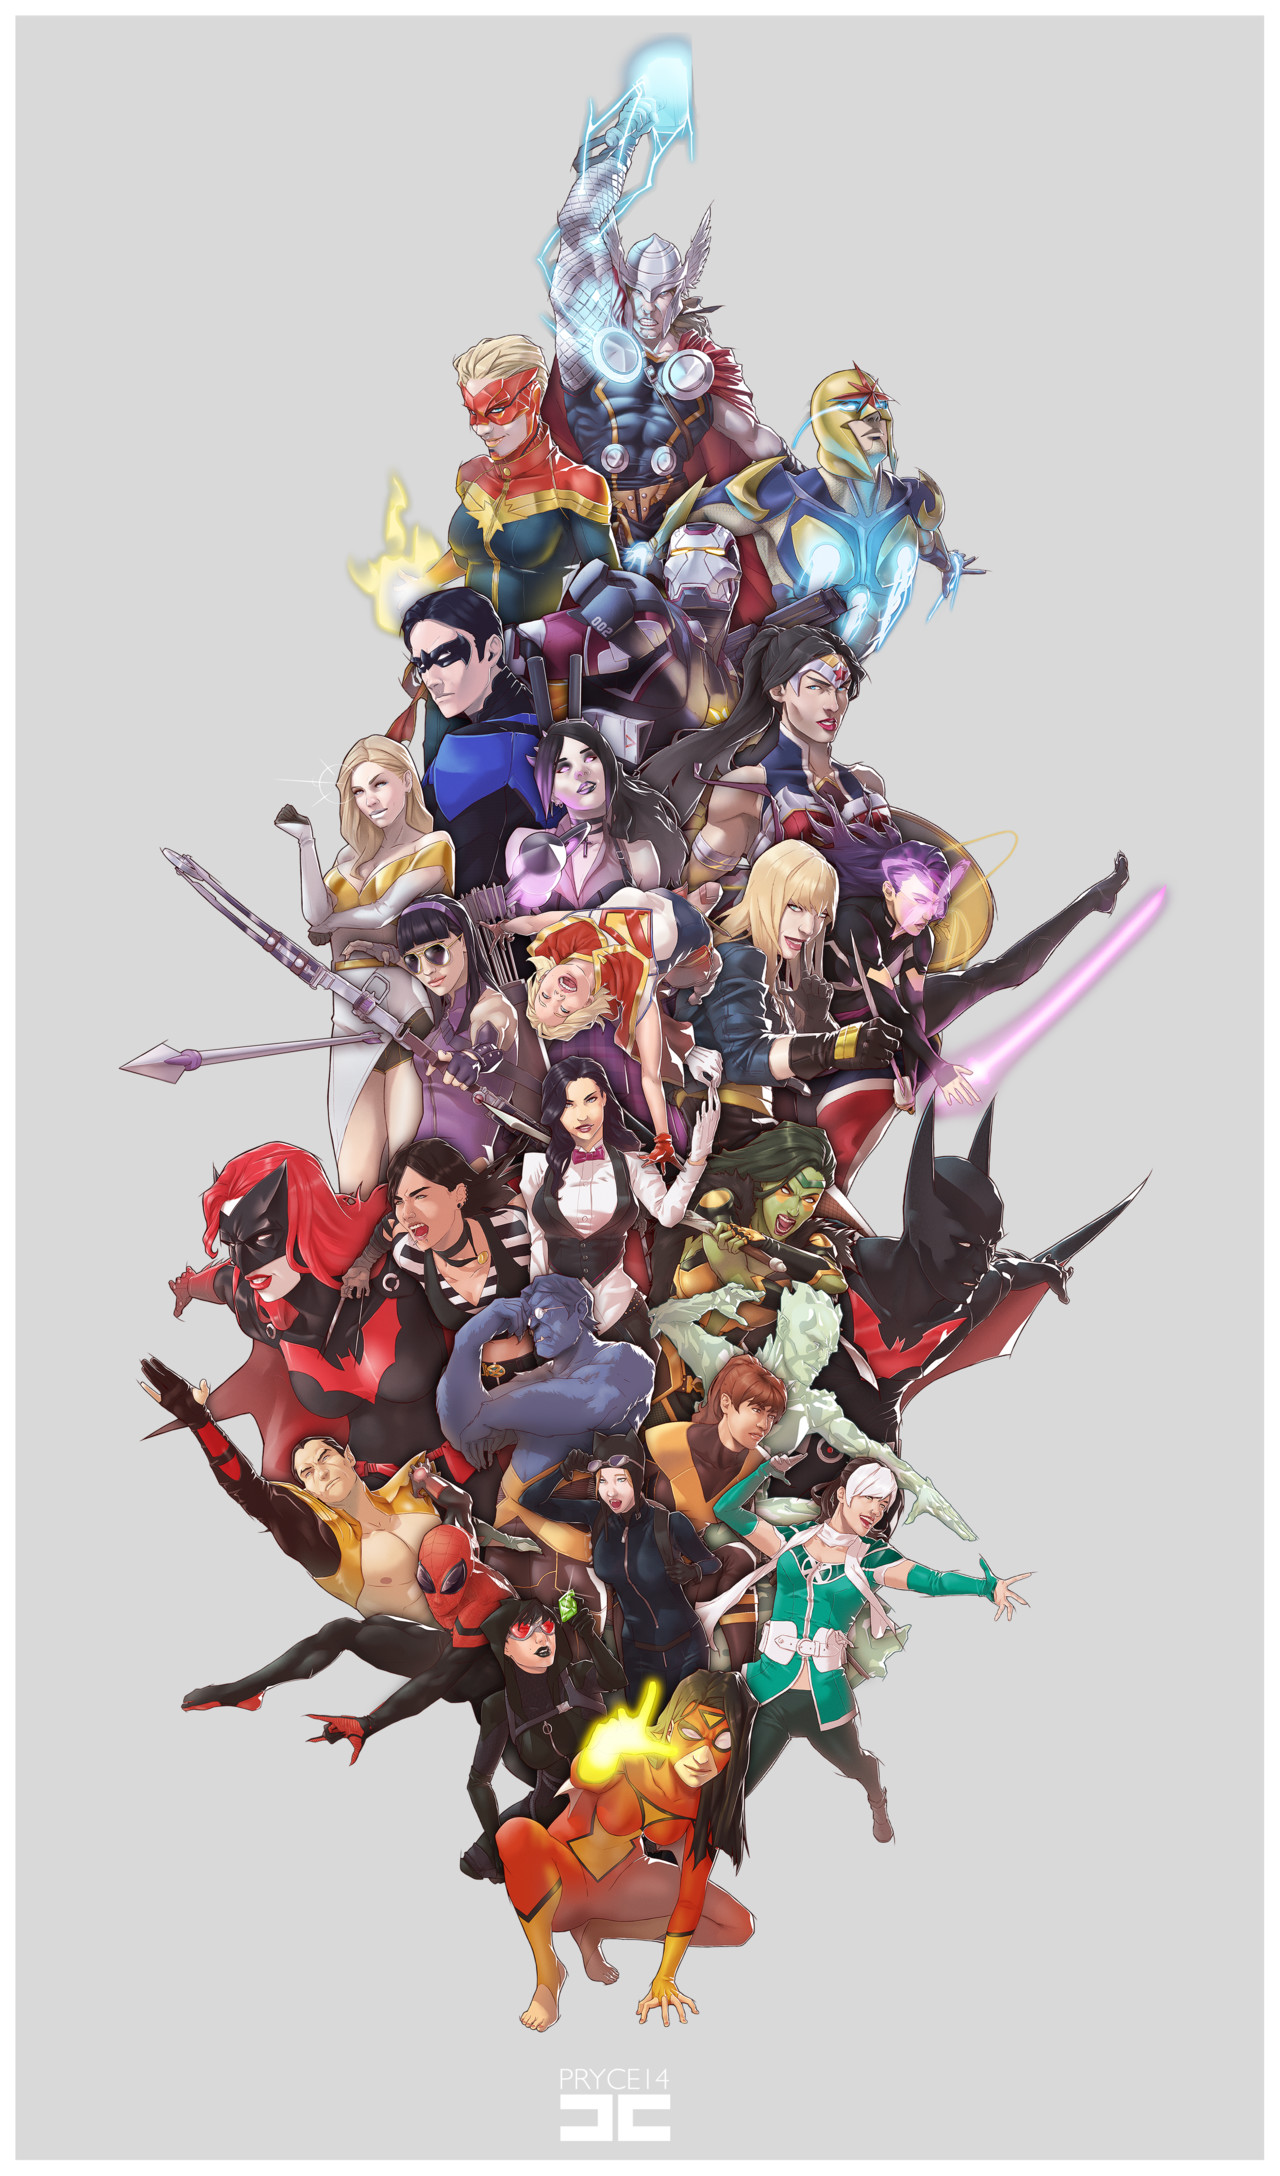 1280x2176 PROJECT 25: SUPERHEROES by Pryce14